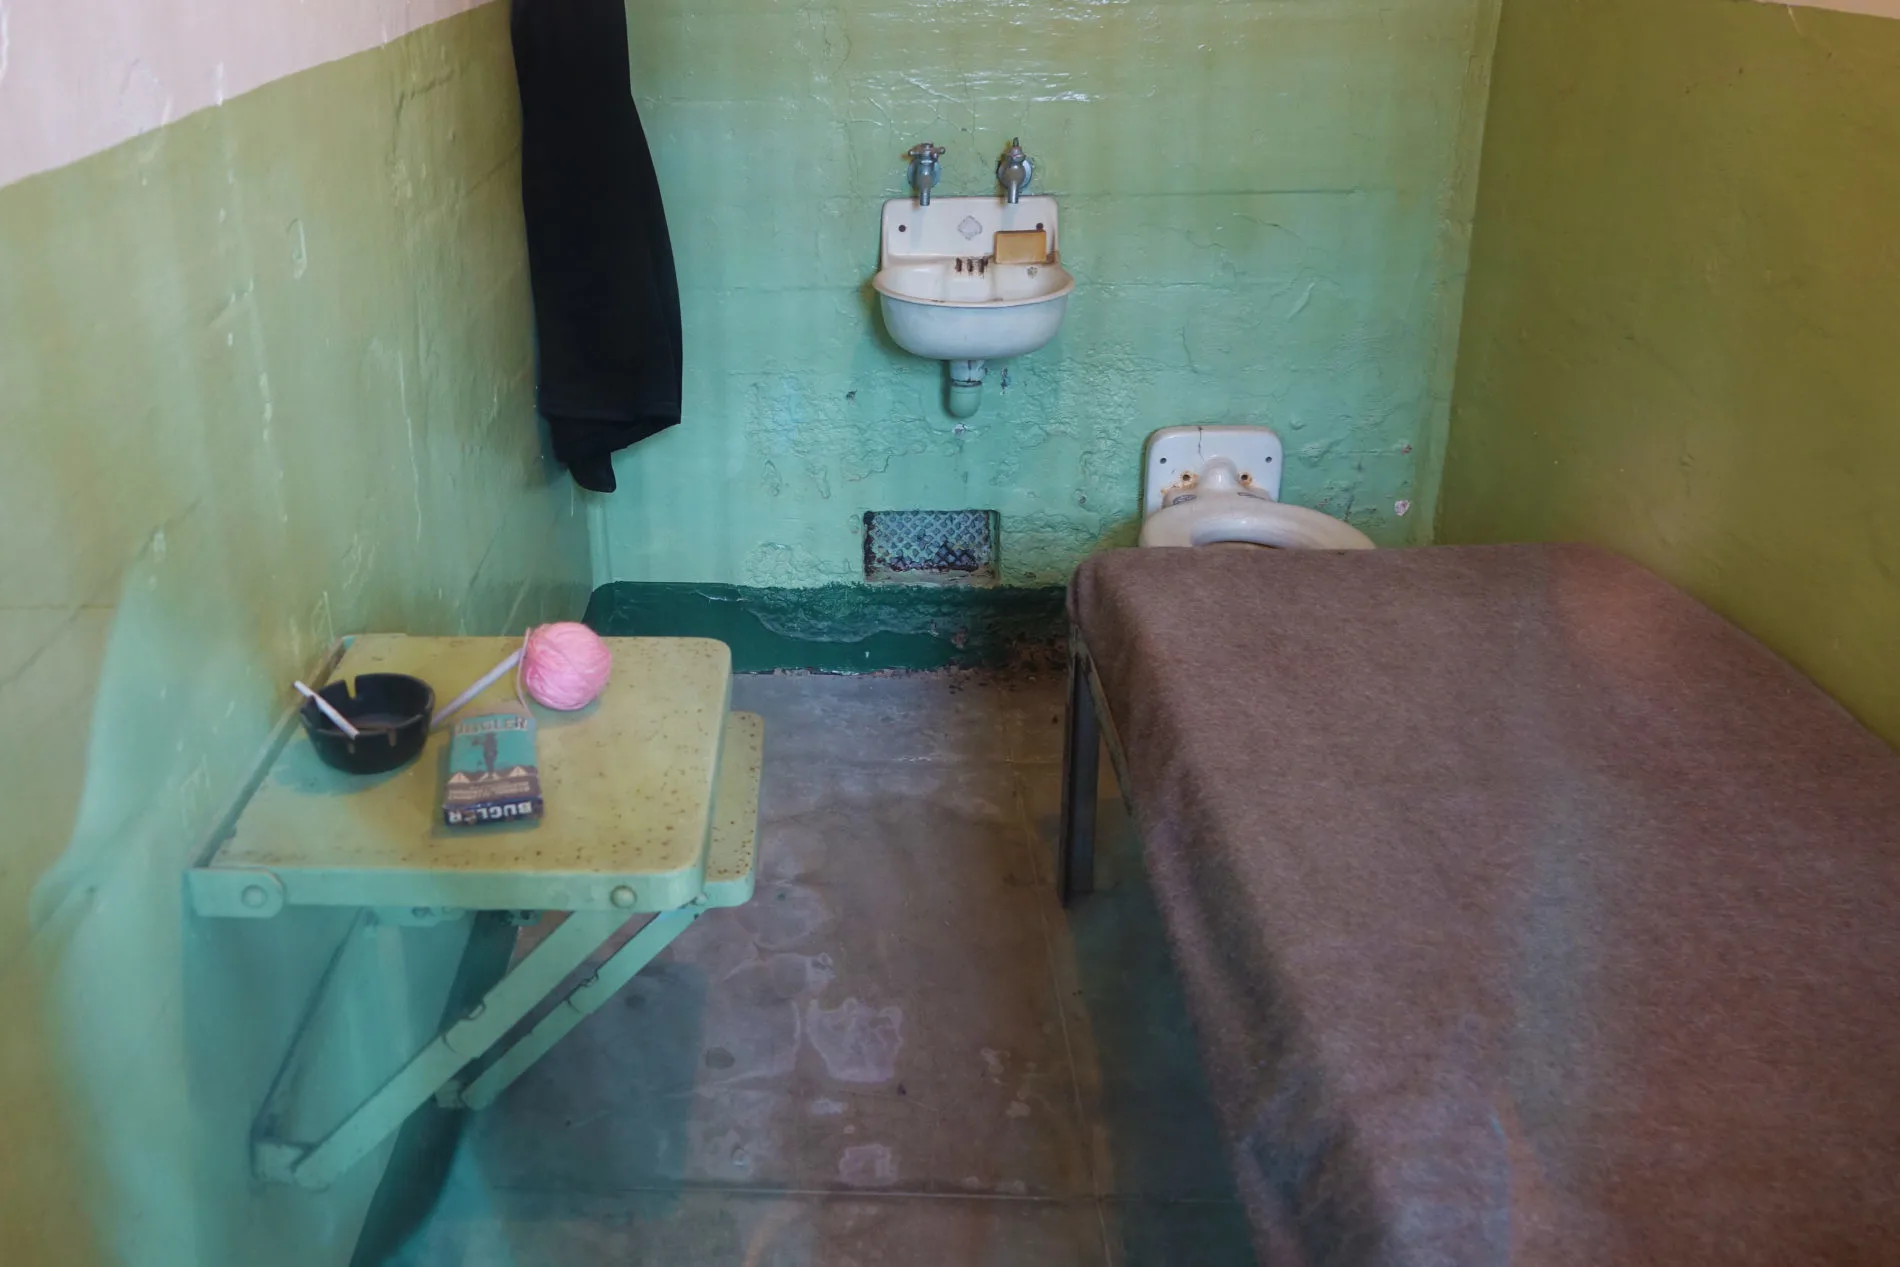 An Alcatraz prison cell with an ashtray, cigarettes, and ball of yarn on the table. Some inmates passed the time knitting.